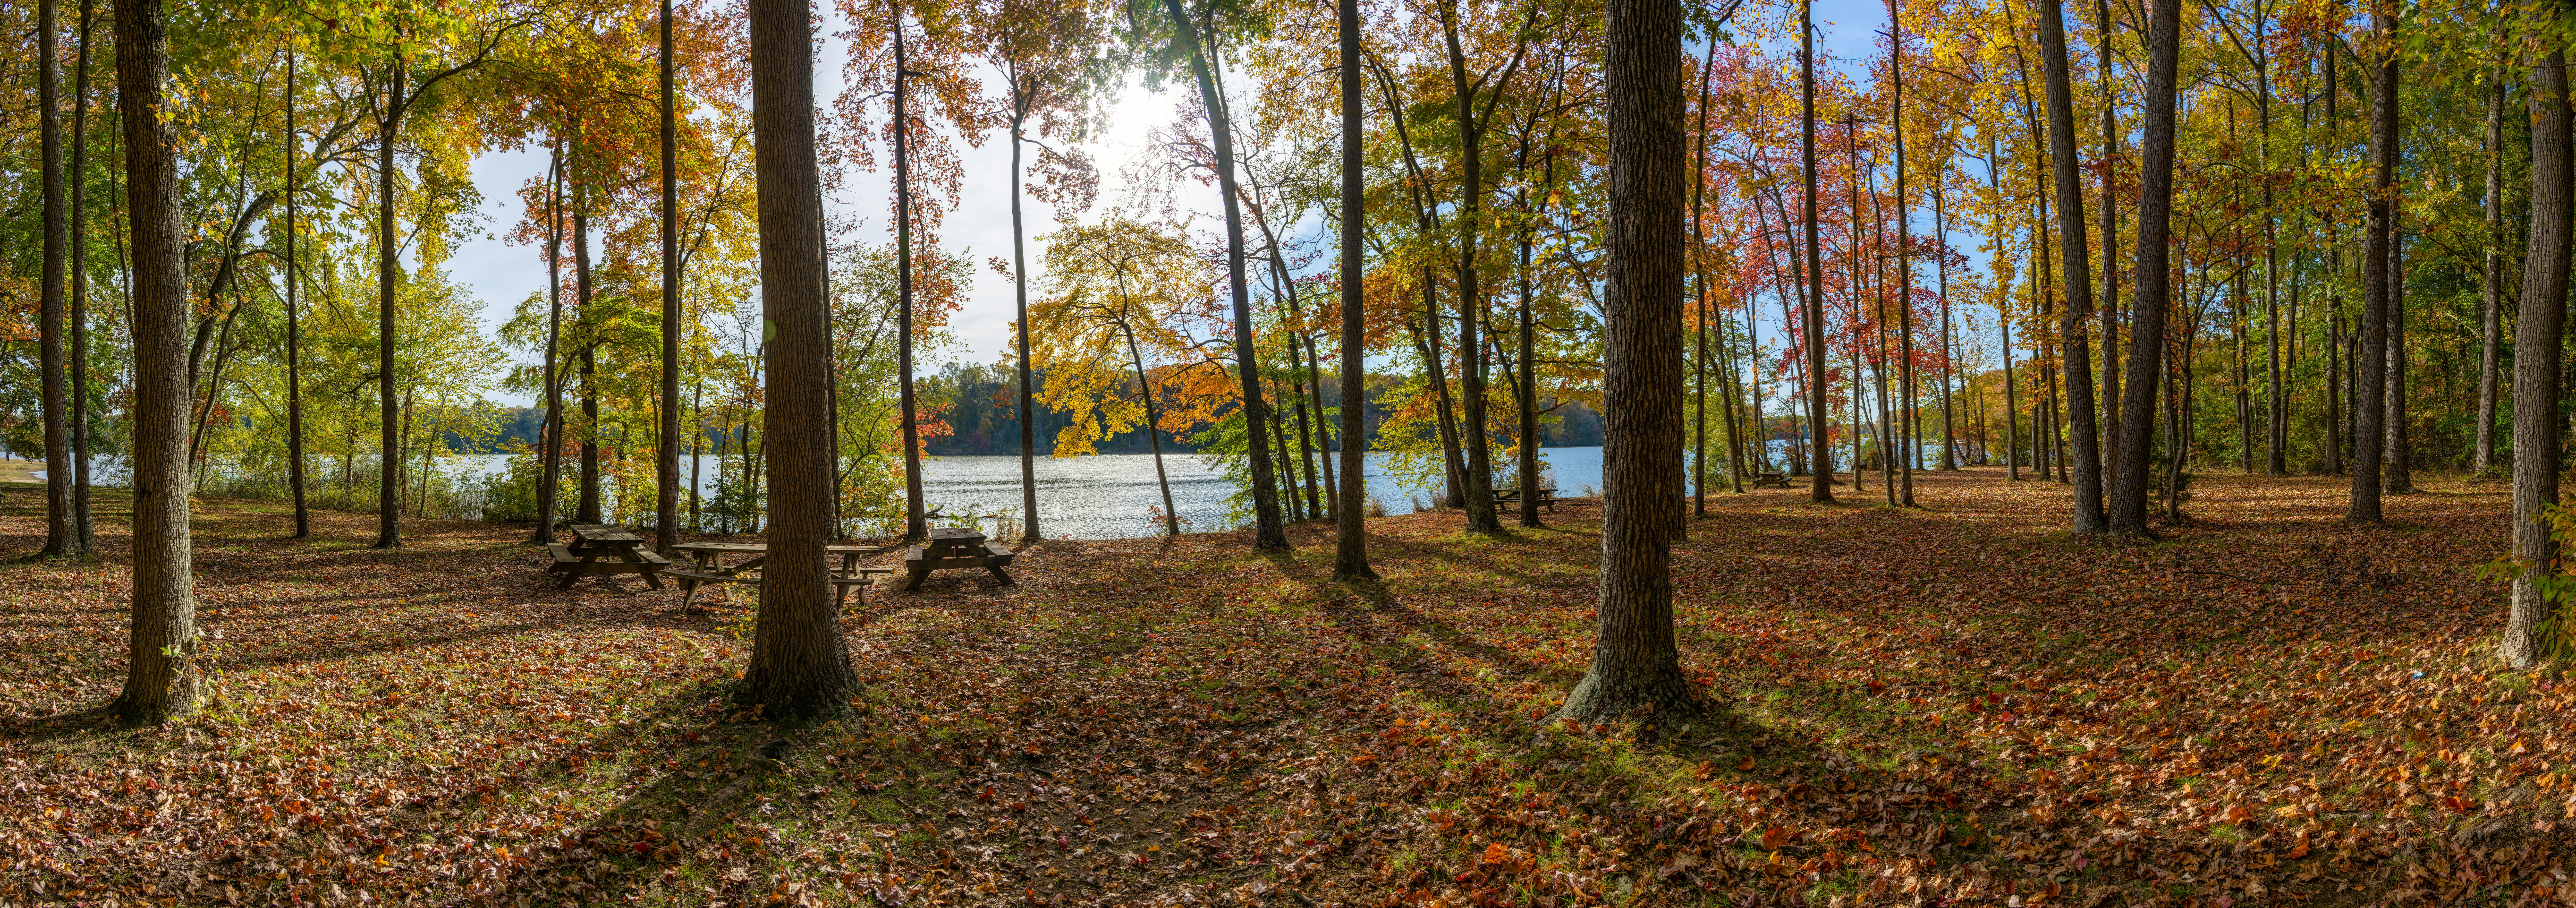 Forest & Lake Pano